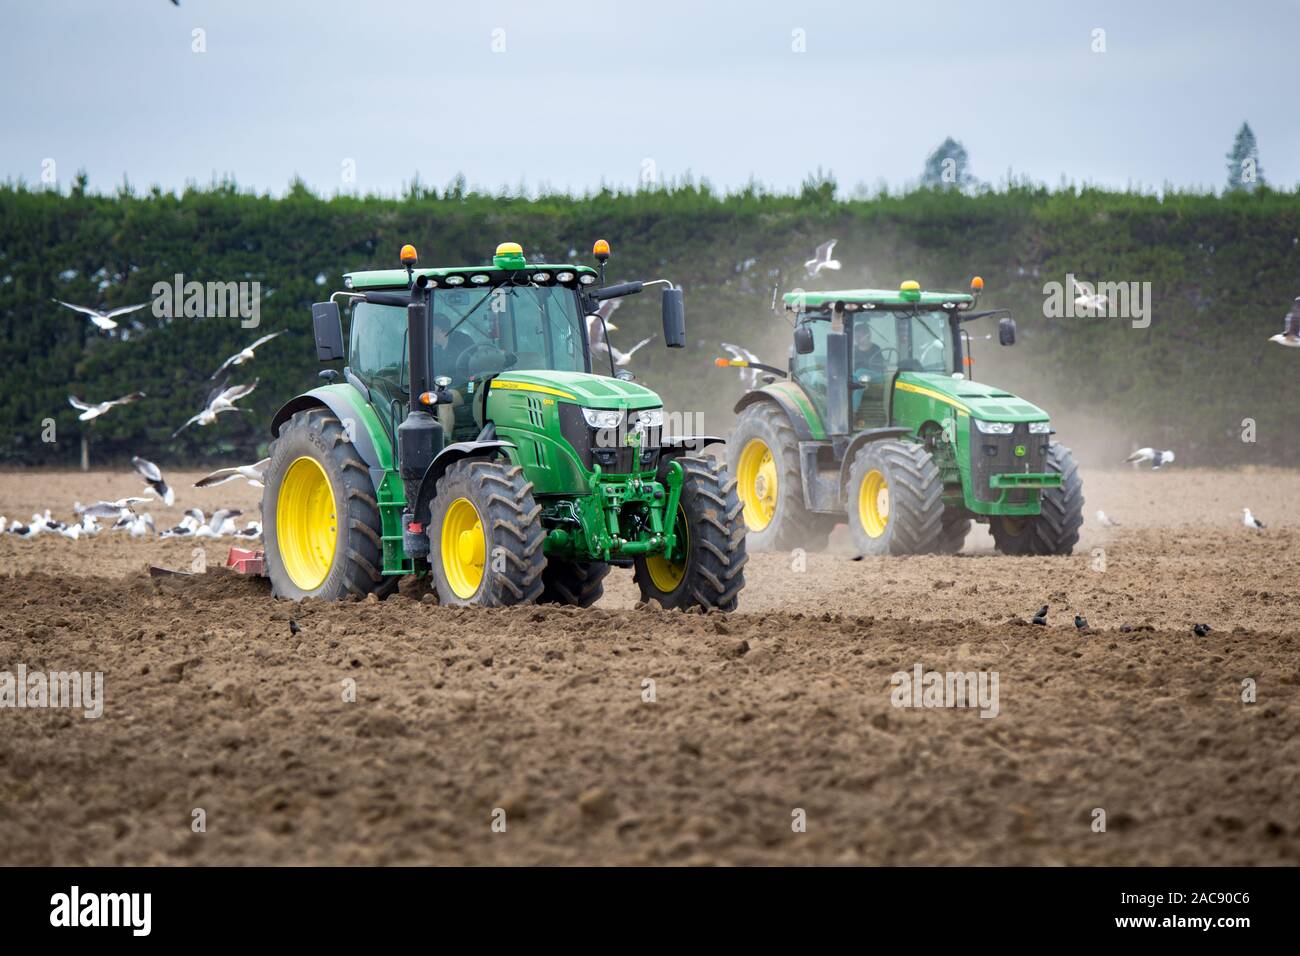 Sheffield, Canterbury, New Zealand, November 30 2019: John Deere tractors at work in a field cultivating the soil ready for potatoes to be planted Stock Photo